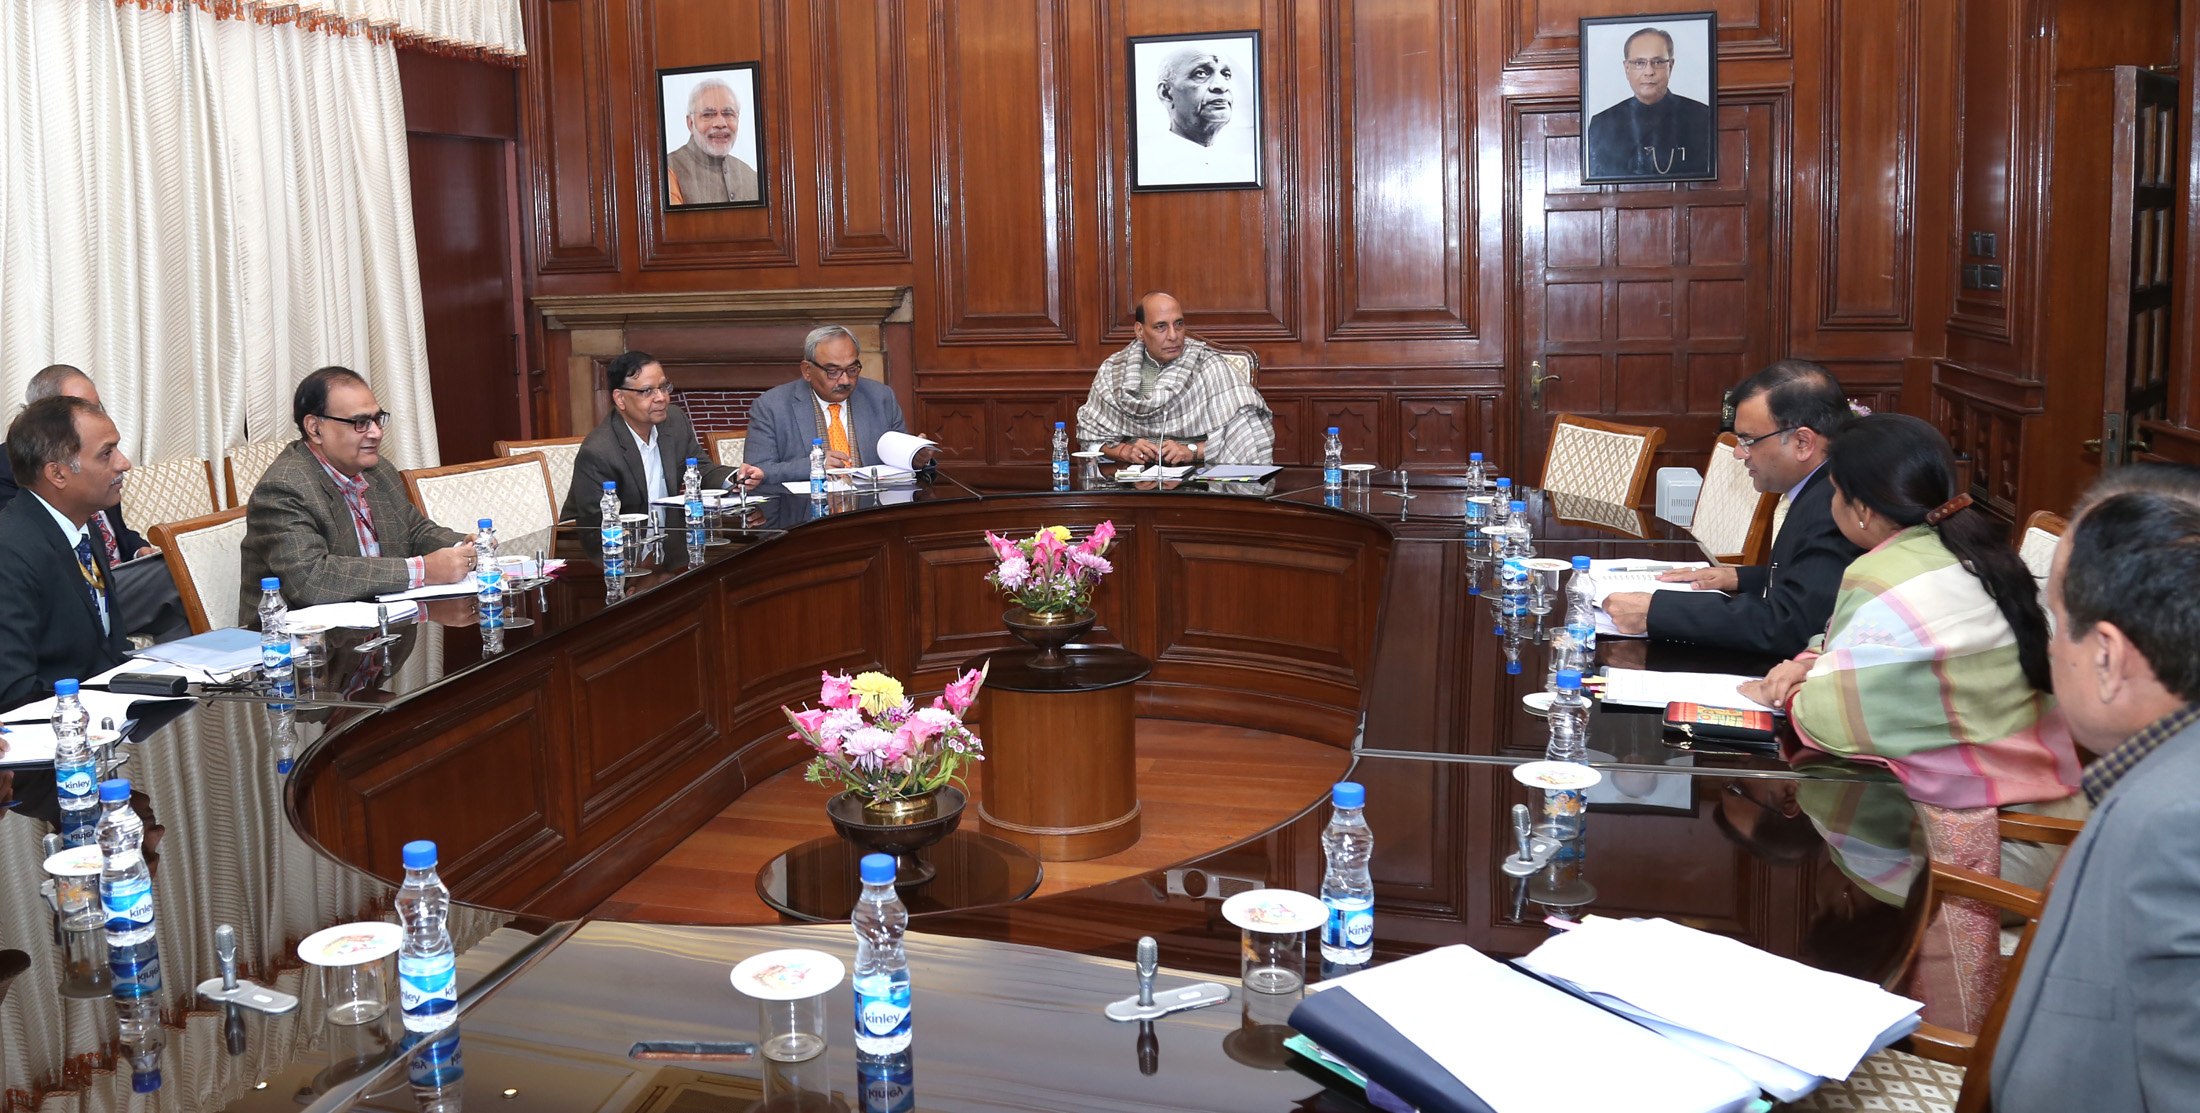 The Union Home Minister, Shri Rajnath Singh chairing a meeting of the High Level Committee (HLC) for Central Assistance to Uttarakhand and Karnataka, in New Delhi on January 05, 2016. 	The Vice Chairman, NITI Aayog, Dr. Arvind Panagariya, the Union Home Secretary, Shri Rajiv Mehrishi and senior officers of the Ministries of Home Affairs, Finance and Agriculture are also seen.